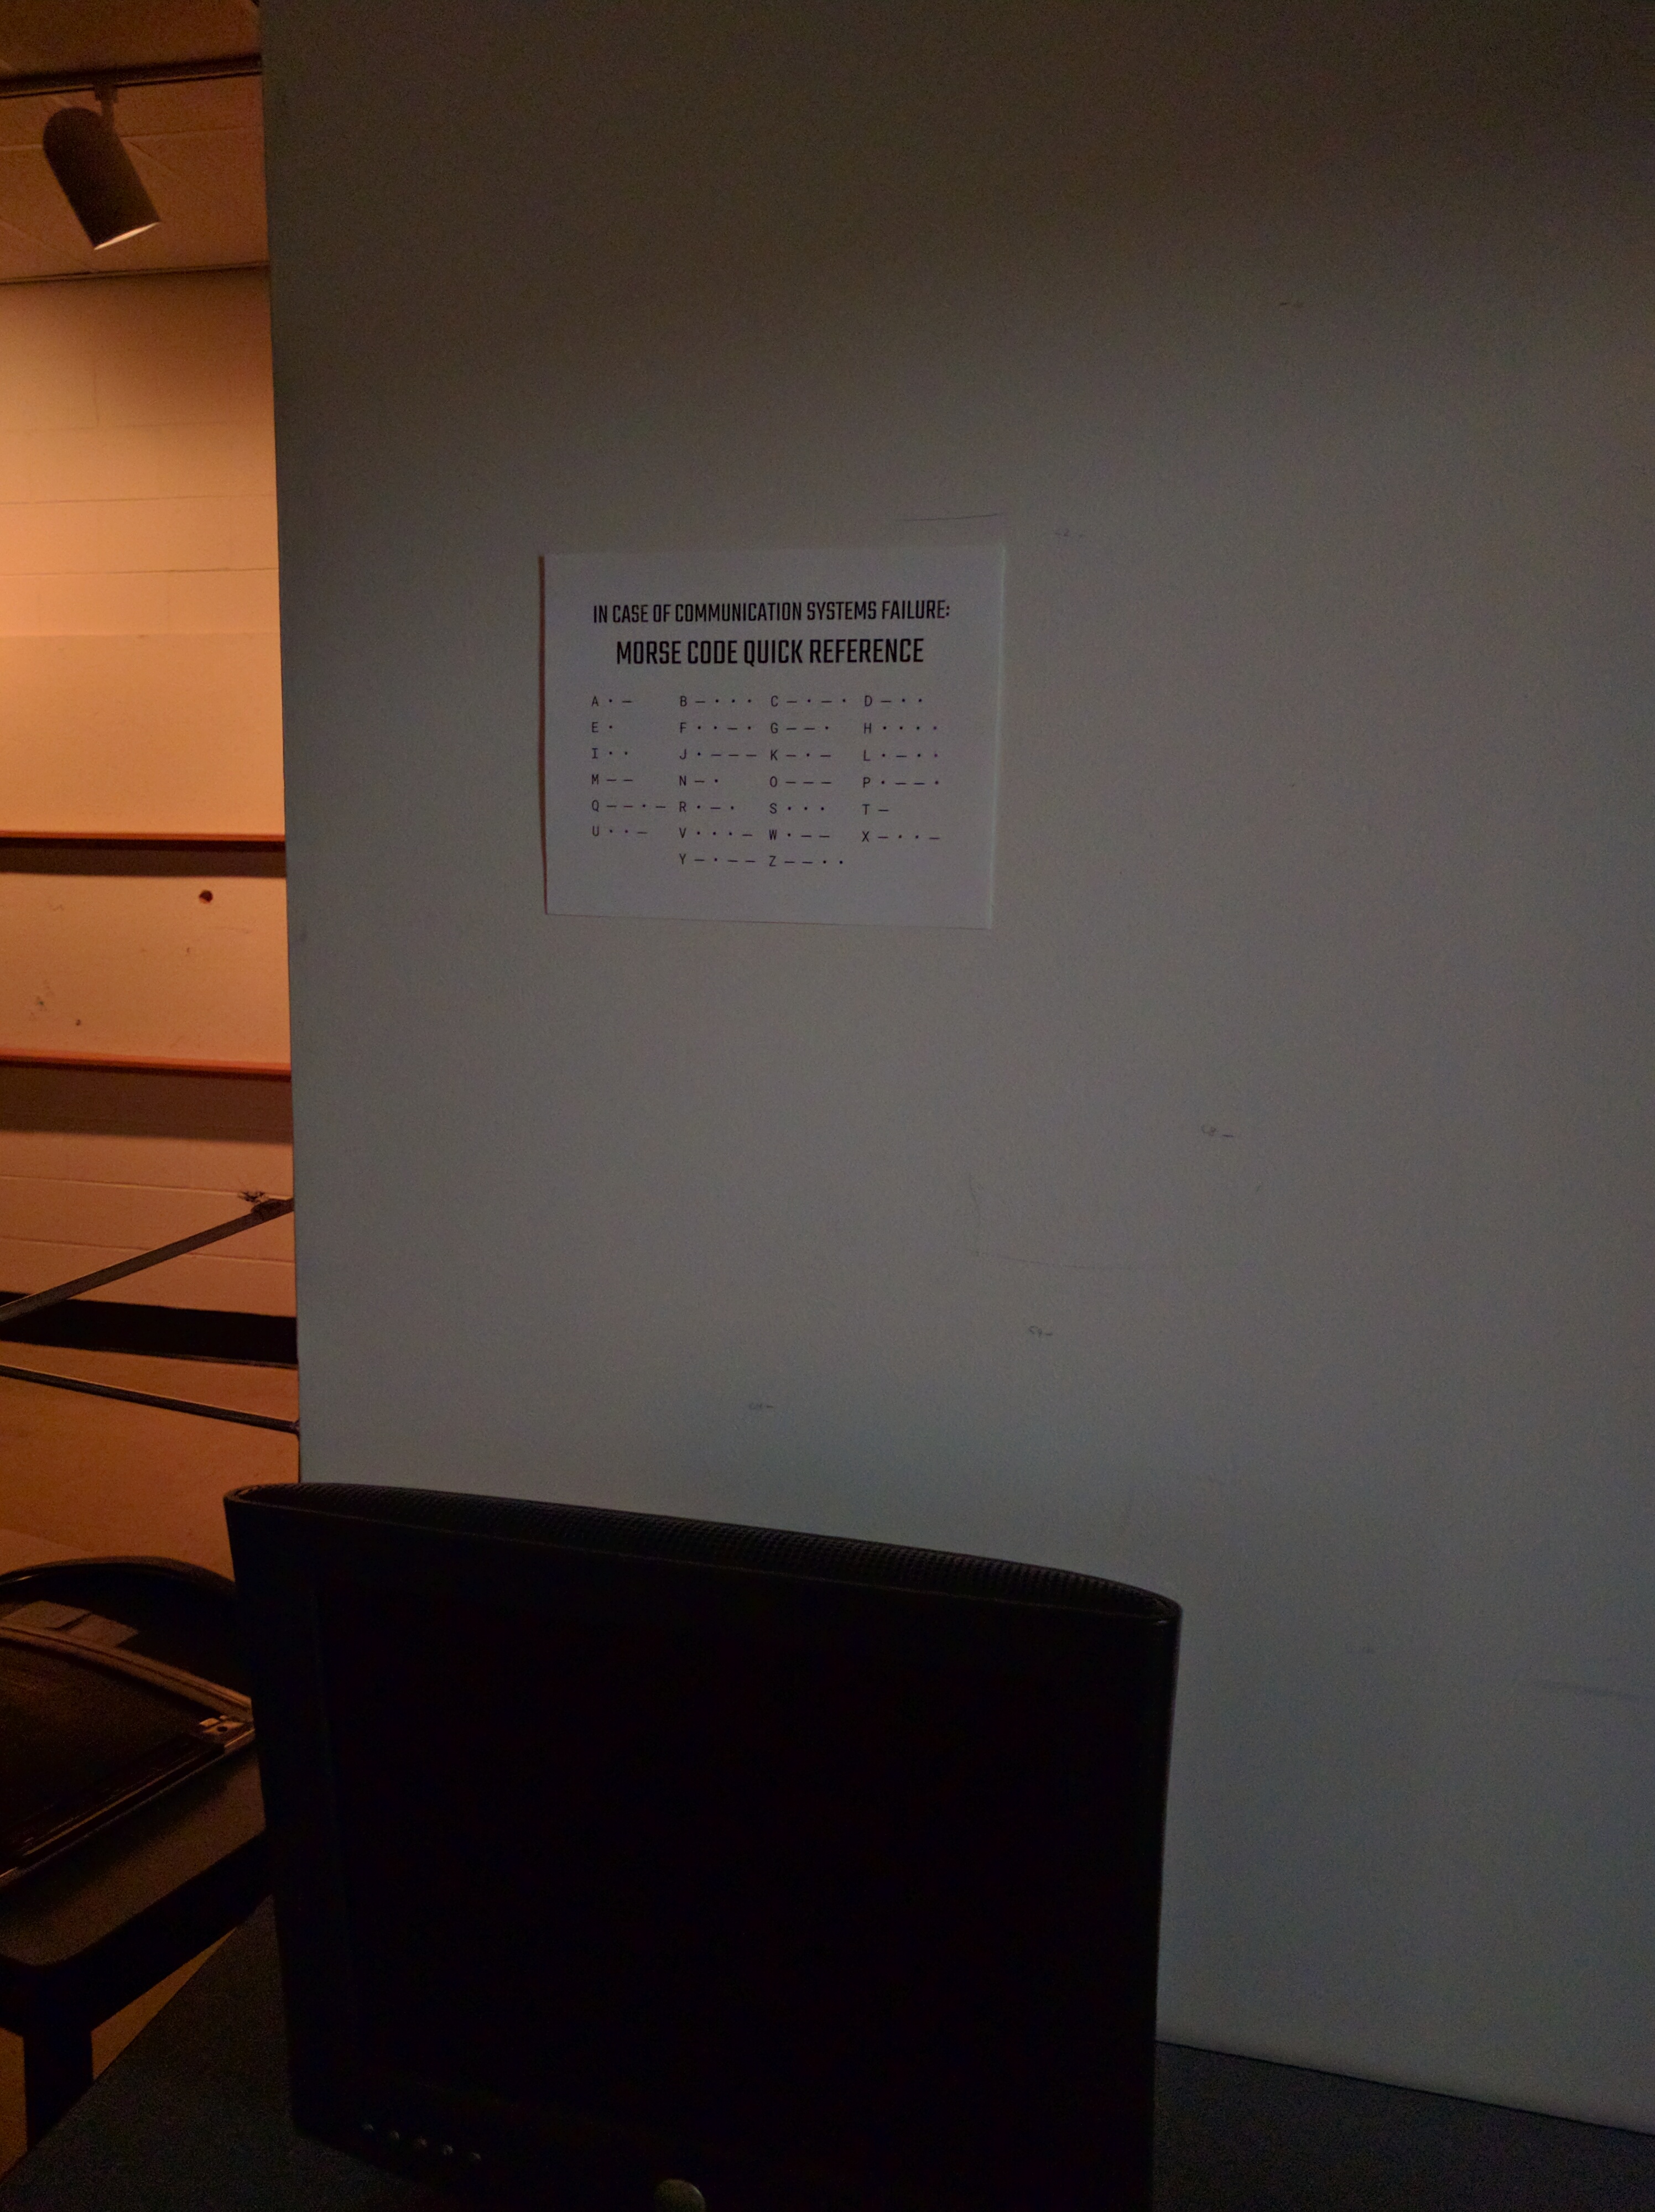 A sign on the wall says, In case of communication systems failure: Morse code quick reference, followed by the Morse code alphabet.